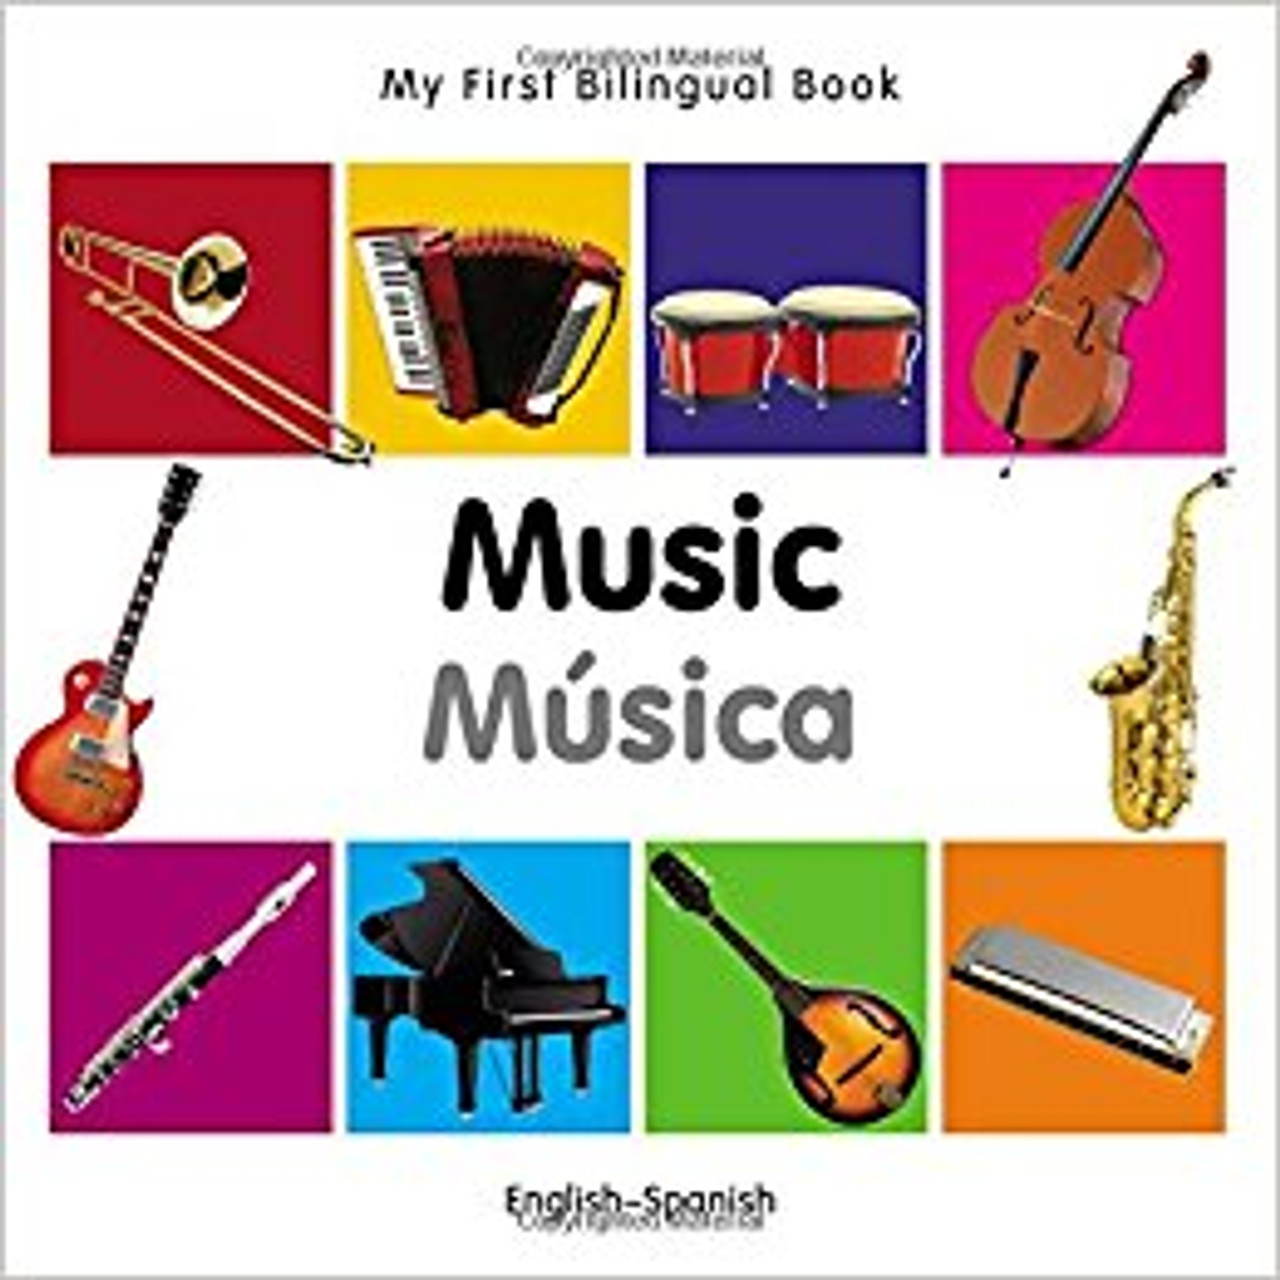 Music/Musica by Millet Publishing 